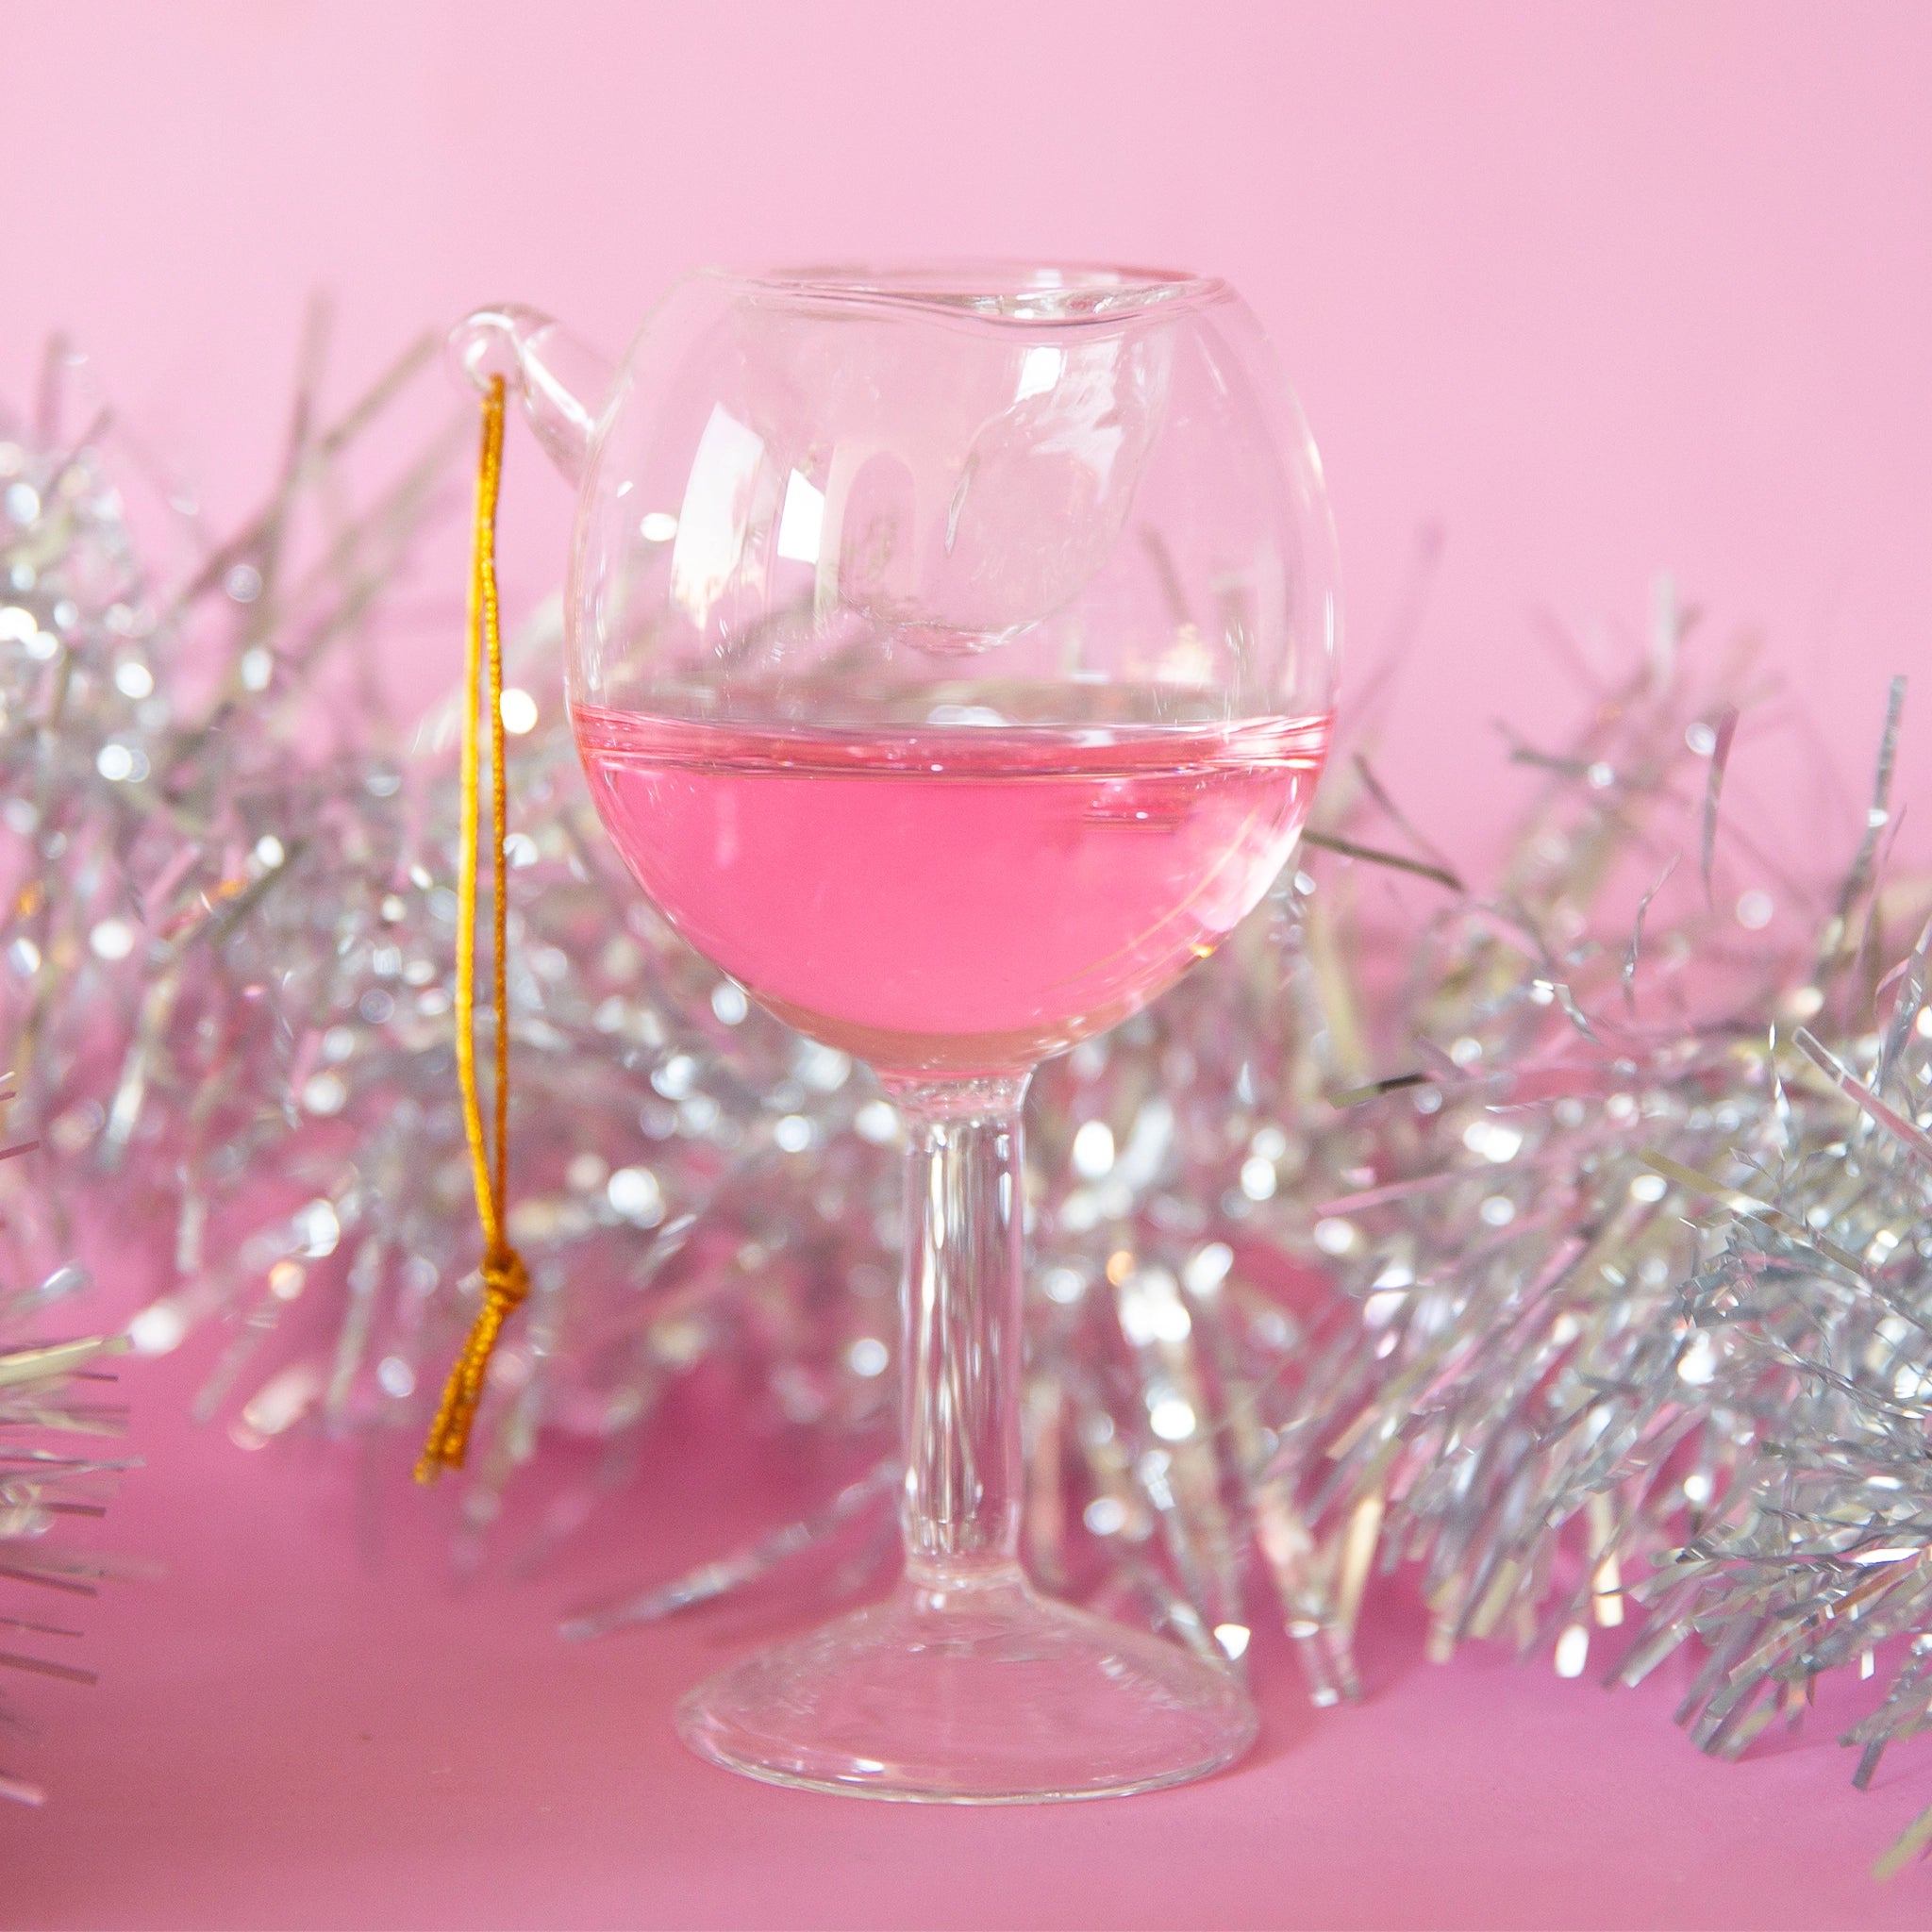 A wine glass ornament features a double lined glass with pink liquid on the inside for some movement!